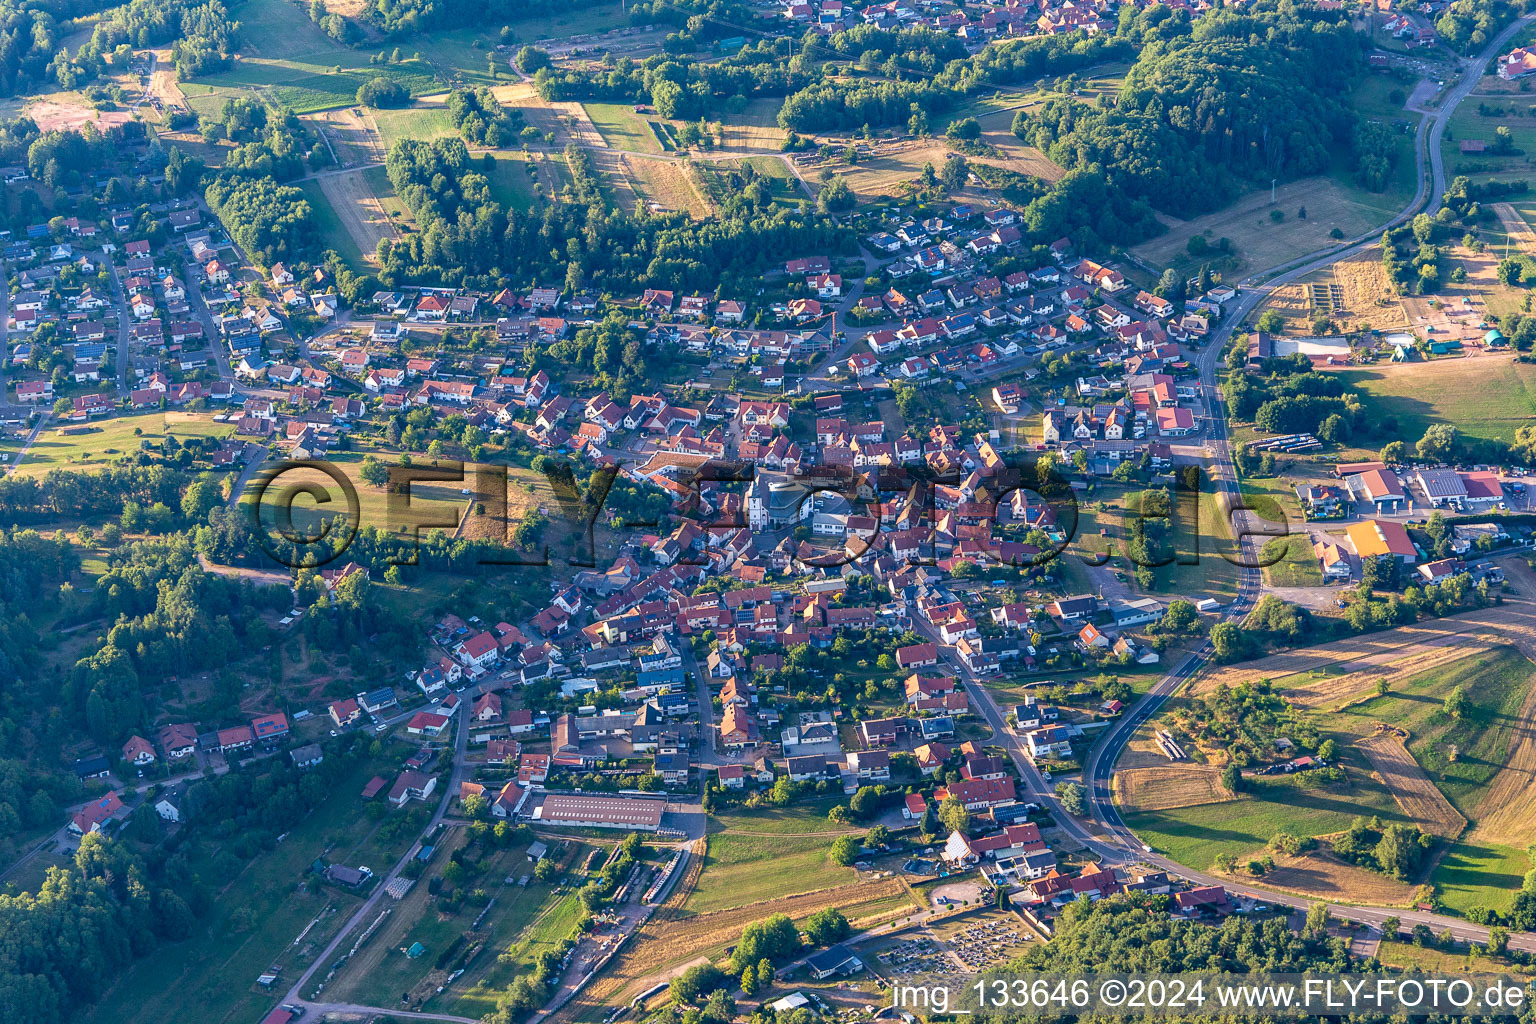 District Gossersweiler in Gossersweiler-Stein in the state Rhineland-Palatinate, Germany viewn from the air